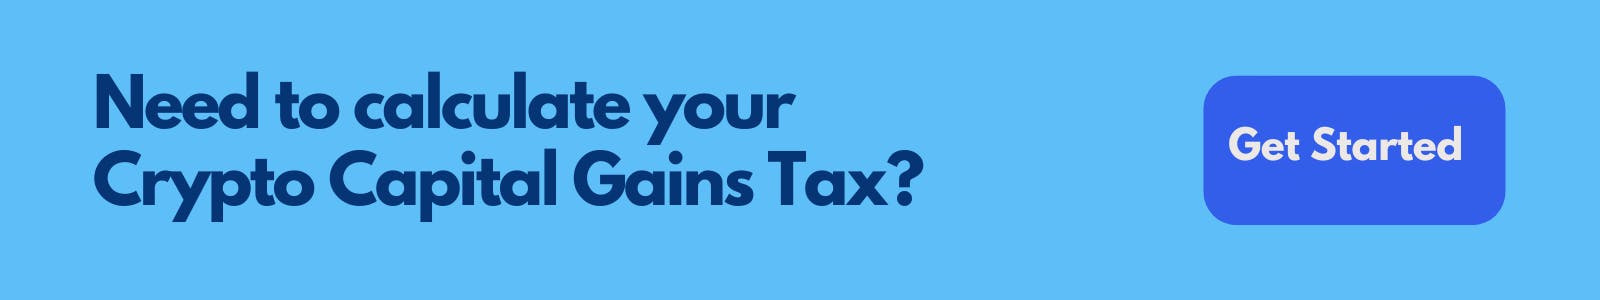 Calculate crypto tax with Koinly